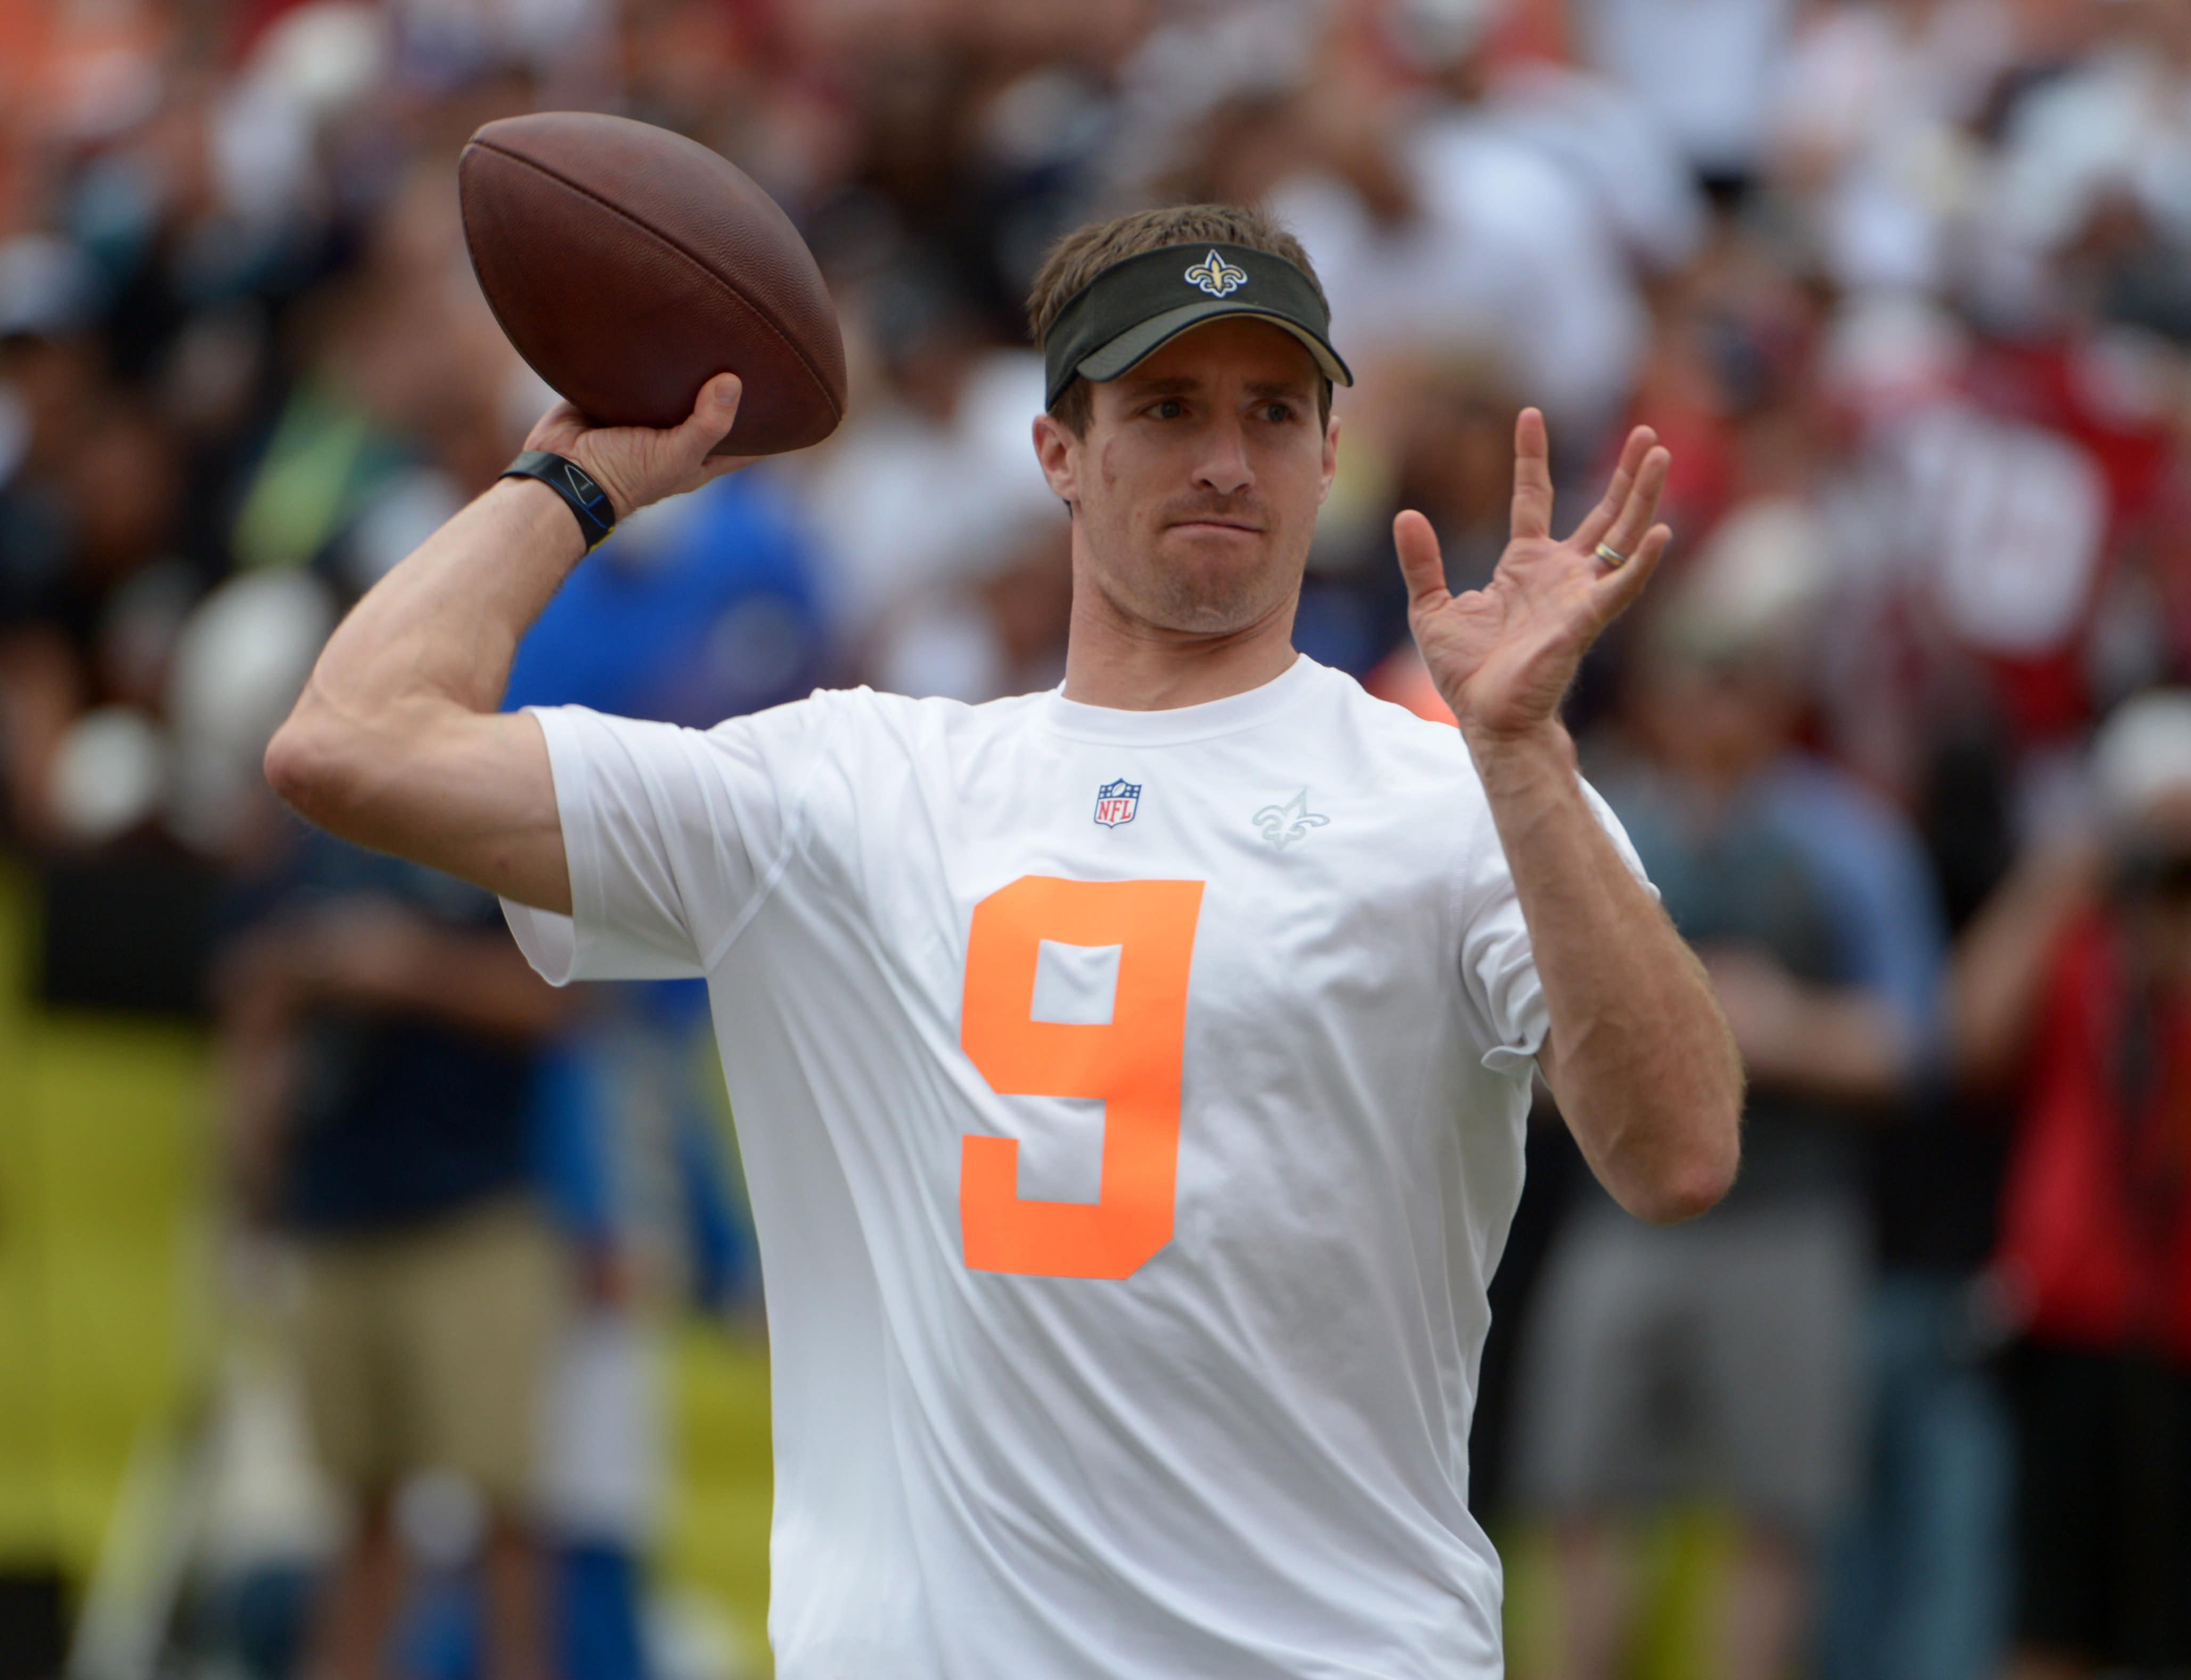 Drew Brees jokes about retirement in ad, but says he's ...